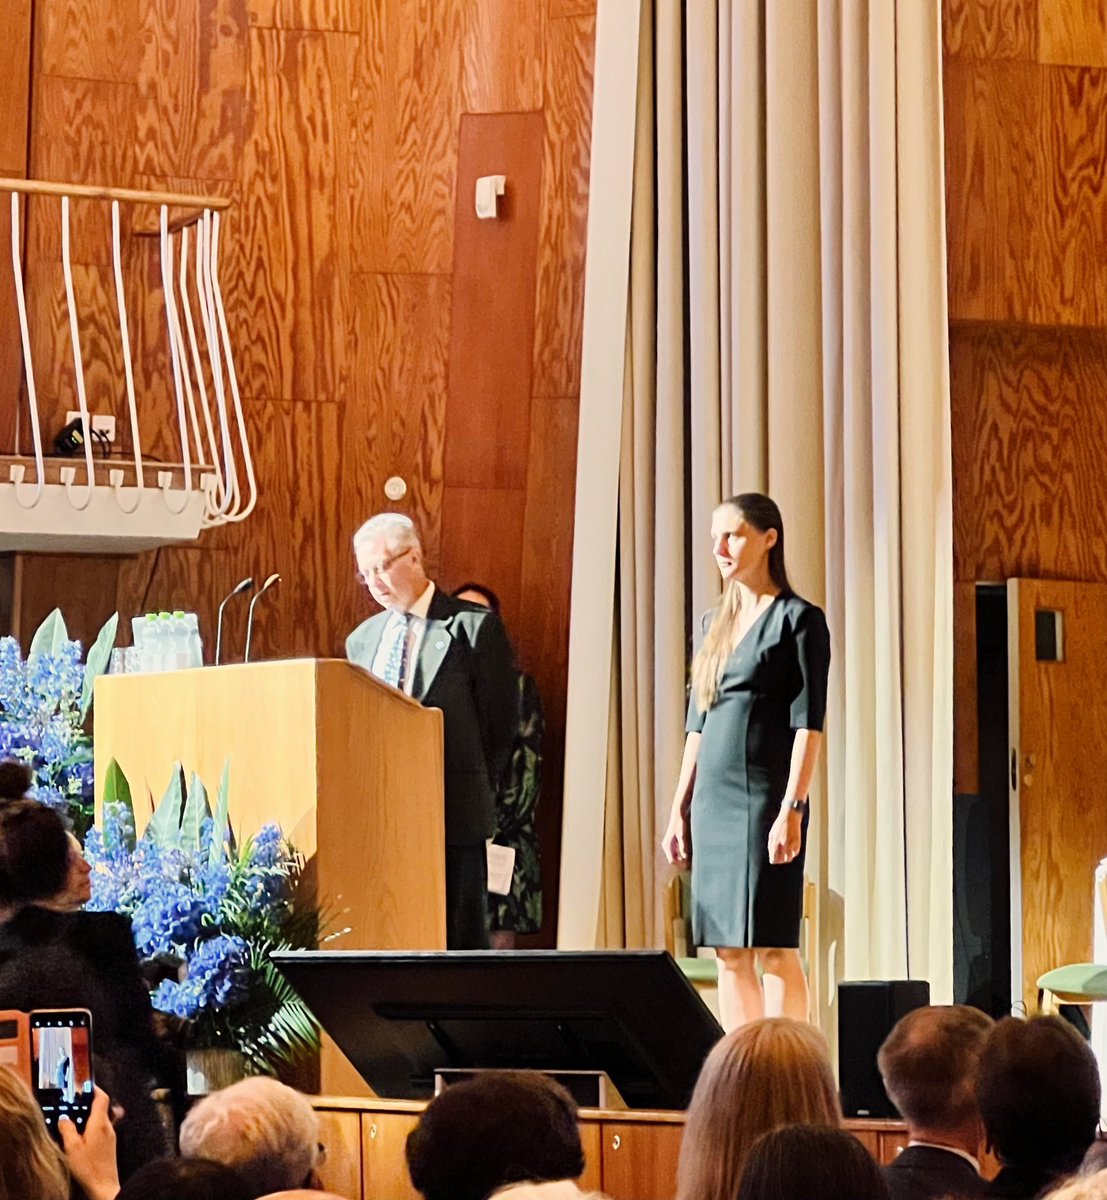 Maryna Viazovska just received a Fields Medal in Helsinki for her profound contributions to Fourier theory and optimal sphere packing problems. Congratulations! #mathematics #fieldsmedal